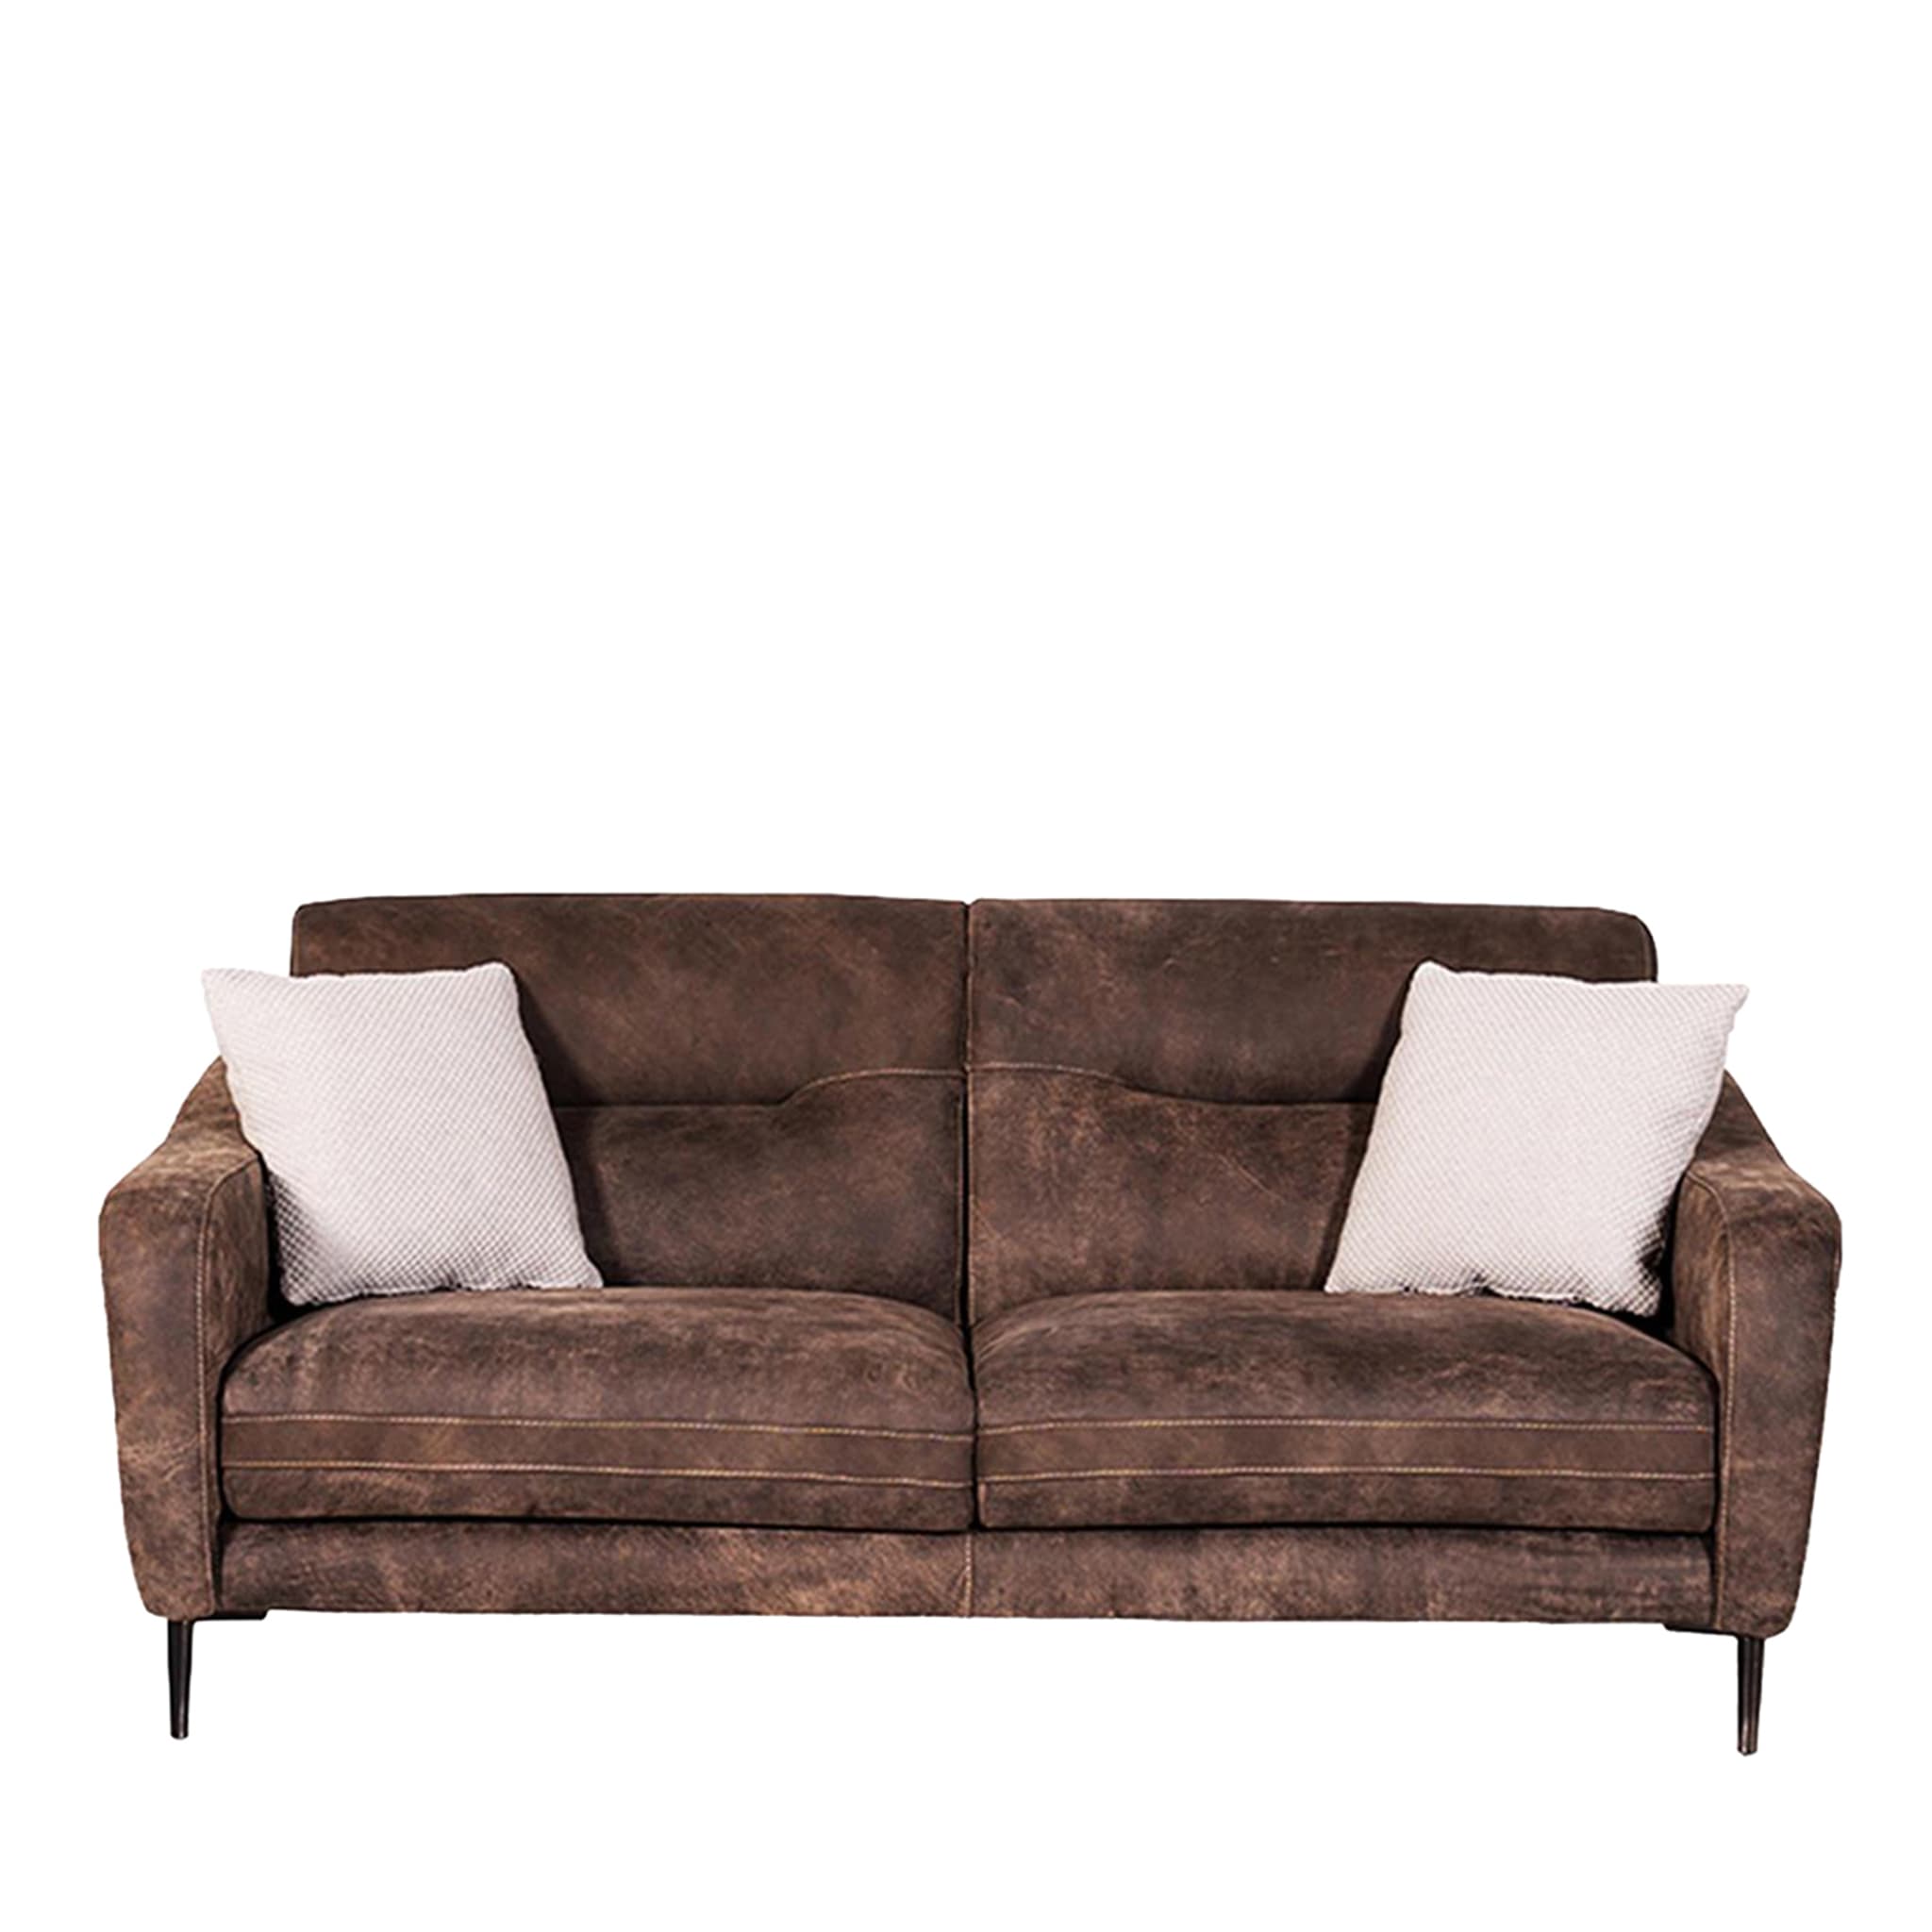 Fonzie Brown Leather 2-Seater Sofa Tribeca Collection - Main view